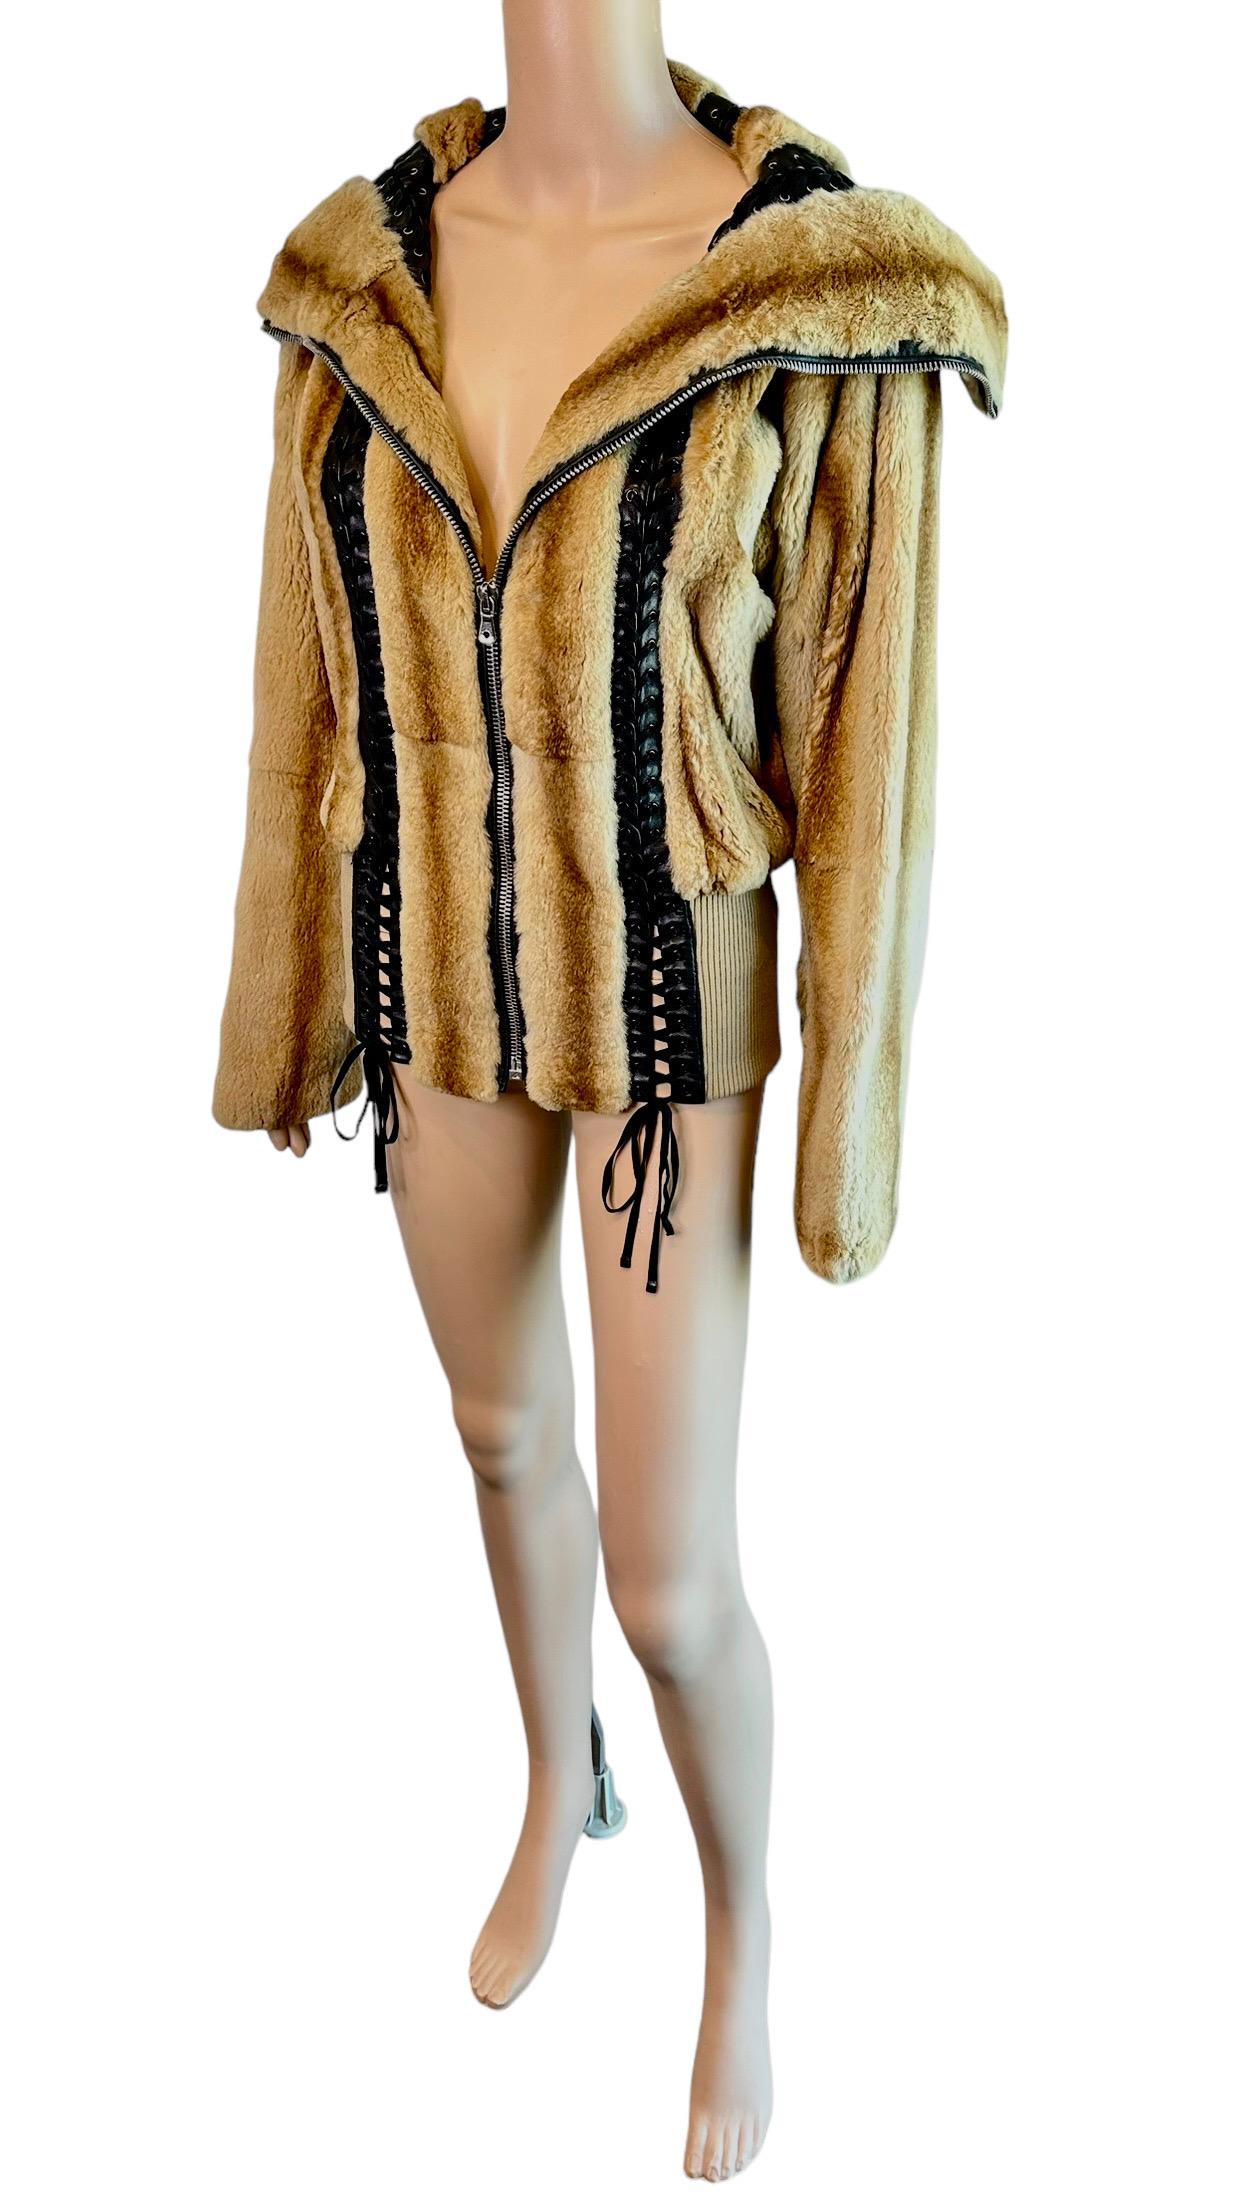 Dolce & Gabbana S/S 2003 Bondage Lace Up Weasel Fur Jacket Coat In Good Condition For Sale In Naples, FL